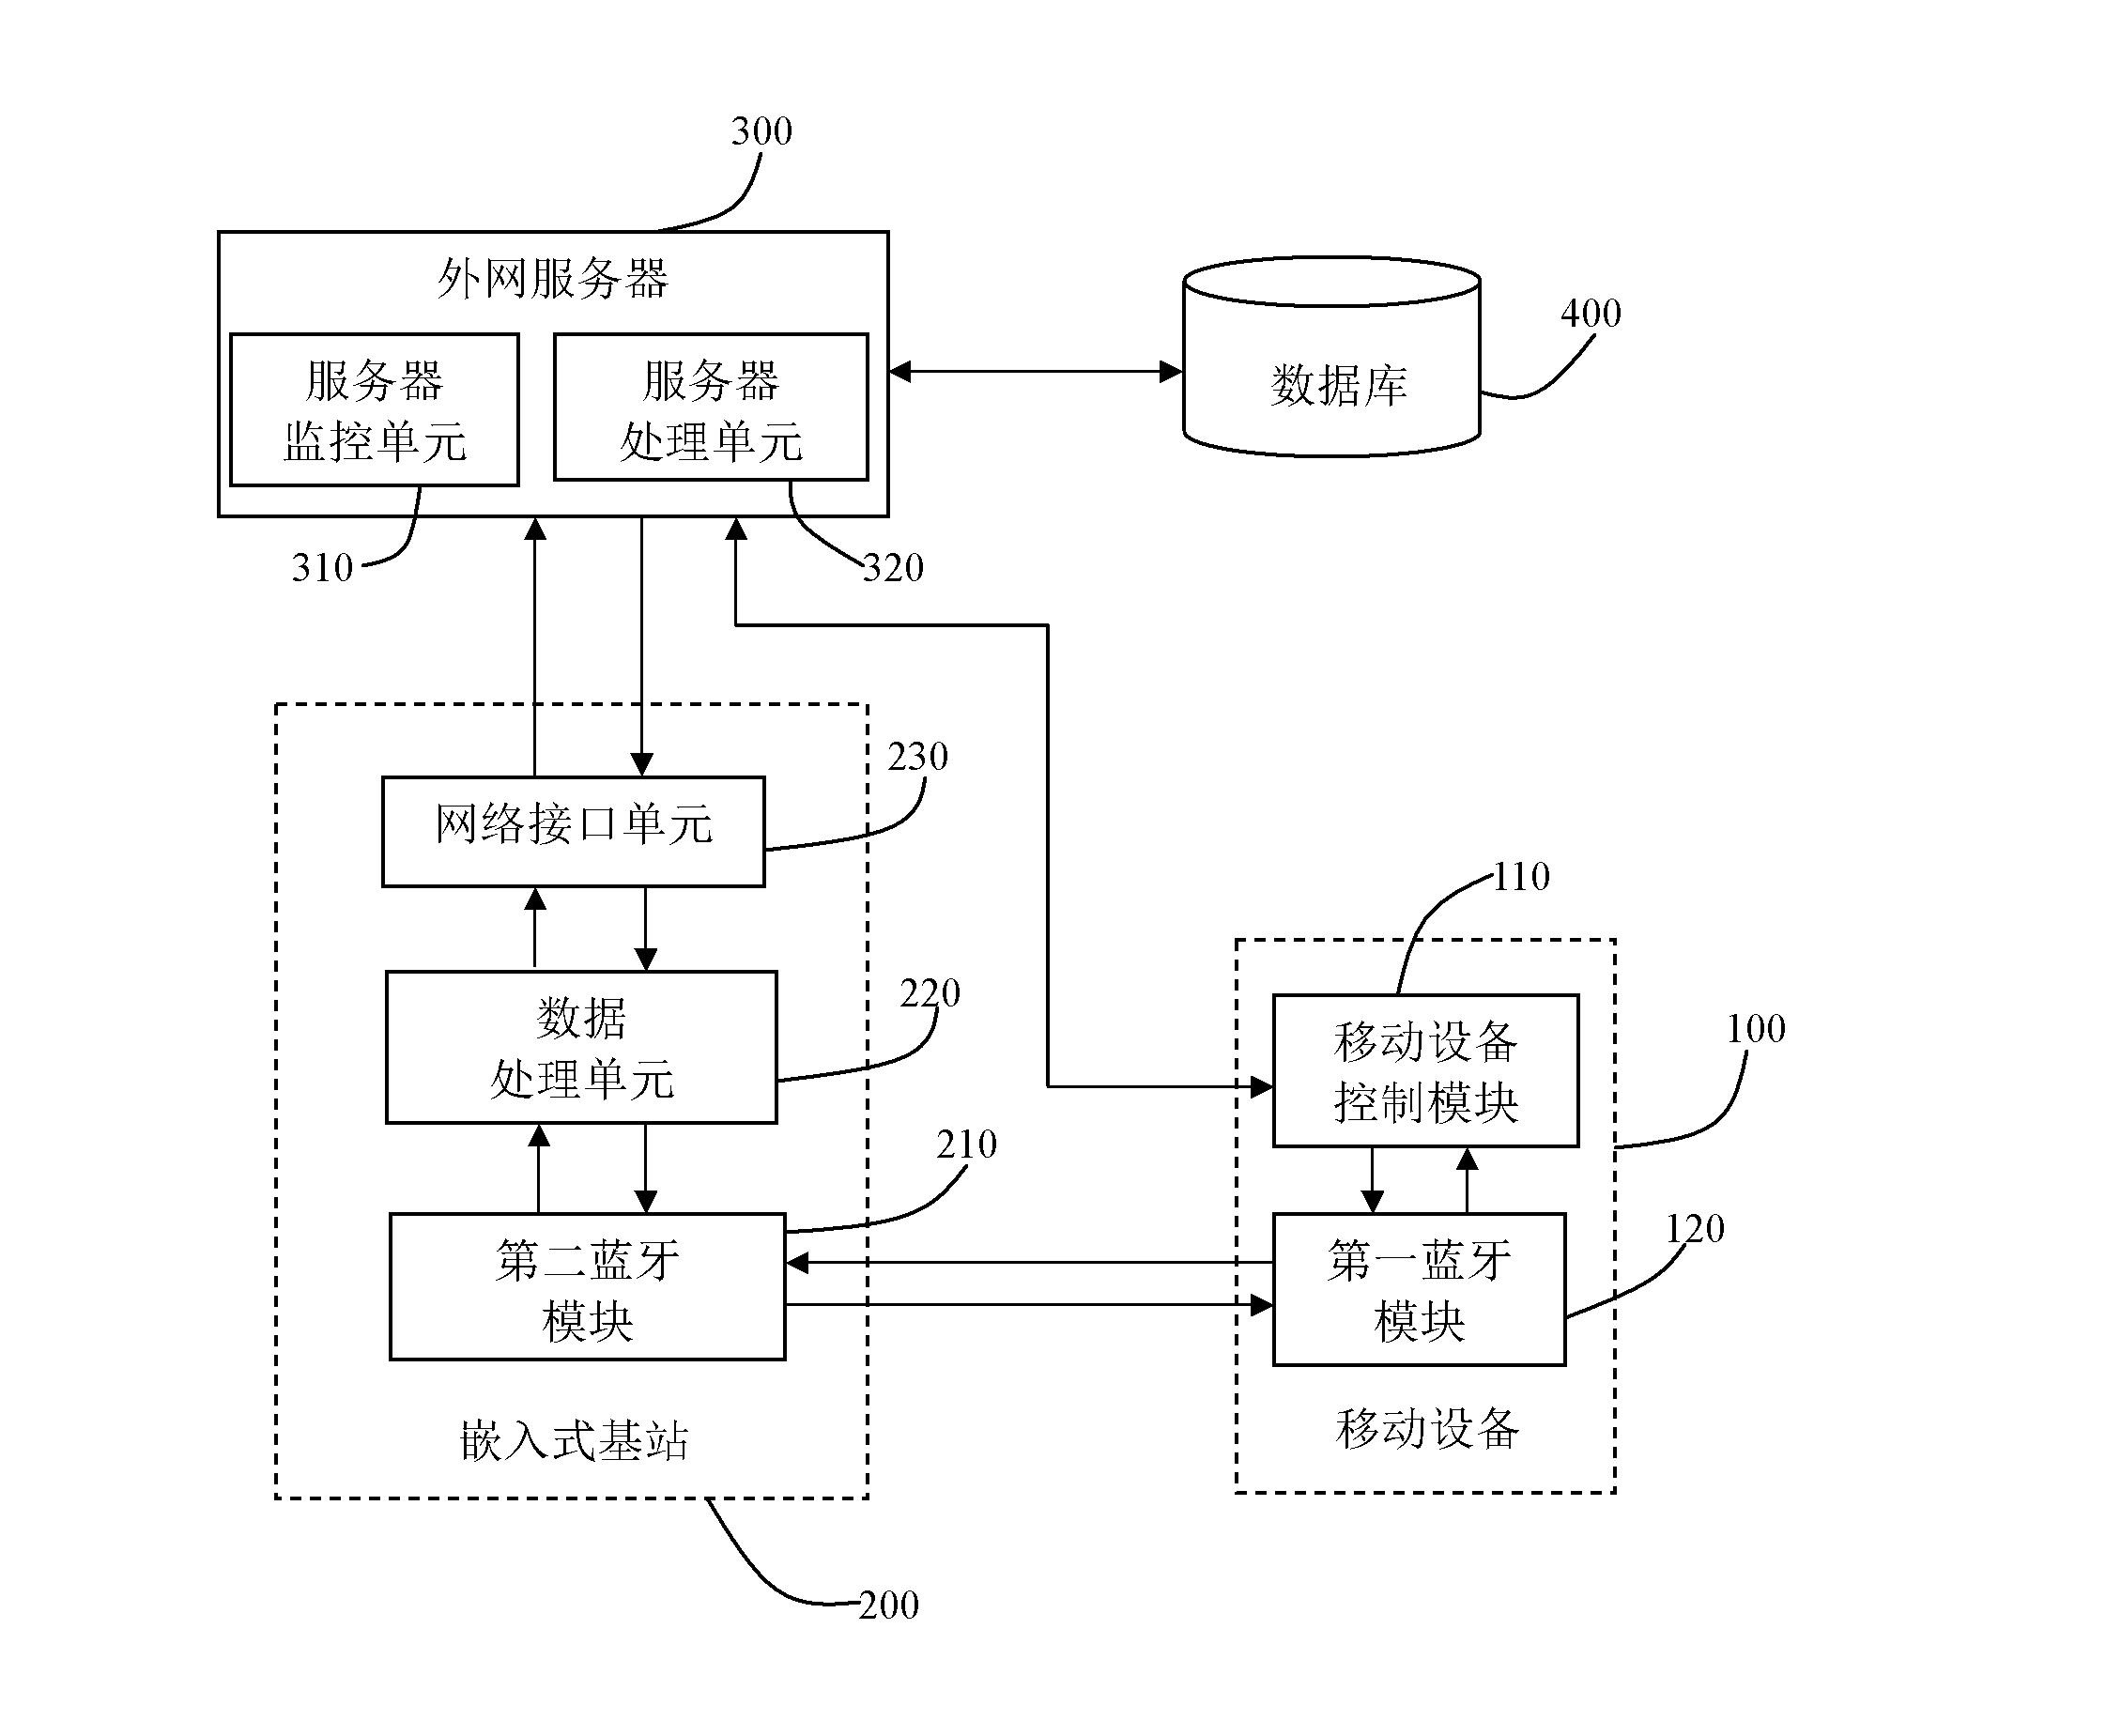 Positioning device and method